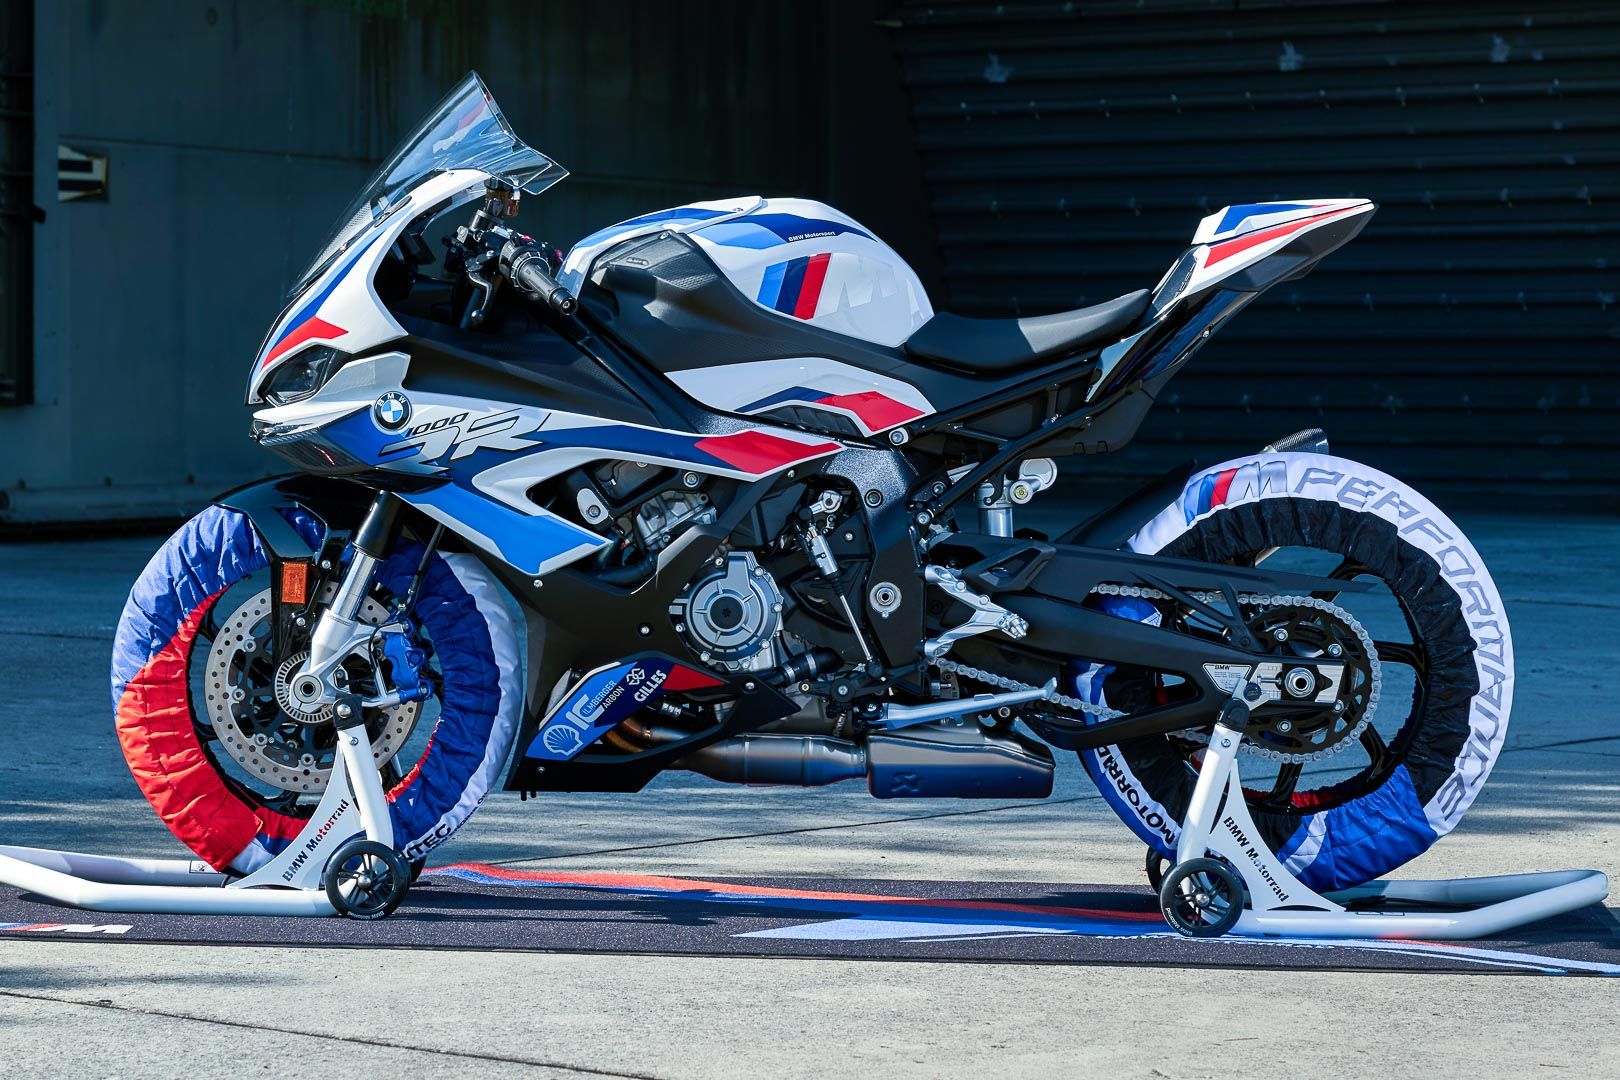 BMW M 1000 RR First Look (21 Fast Facts From World Superbike)